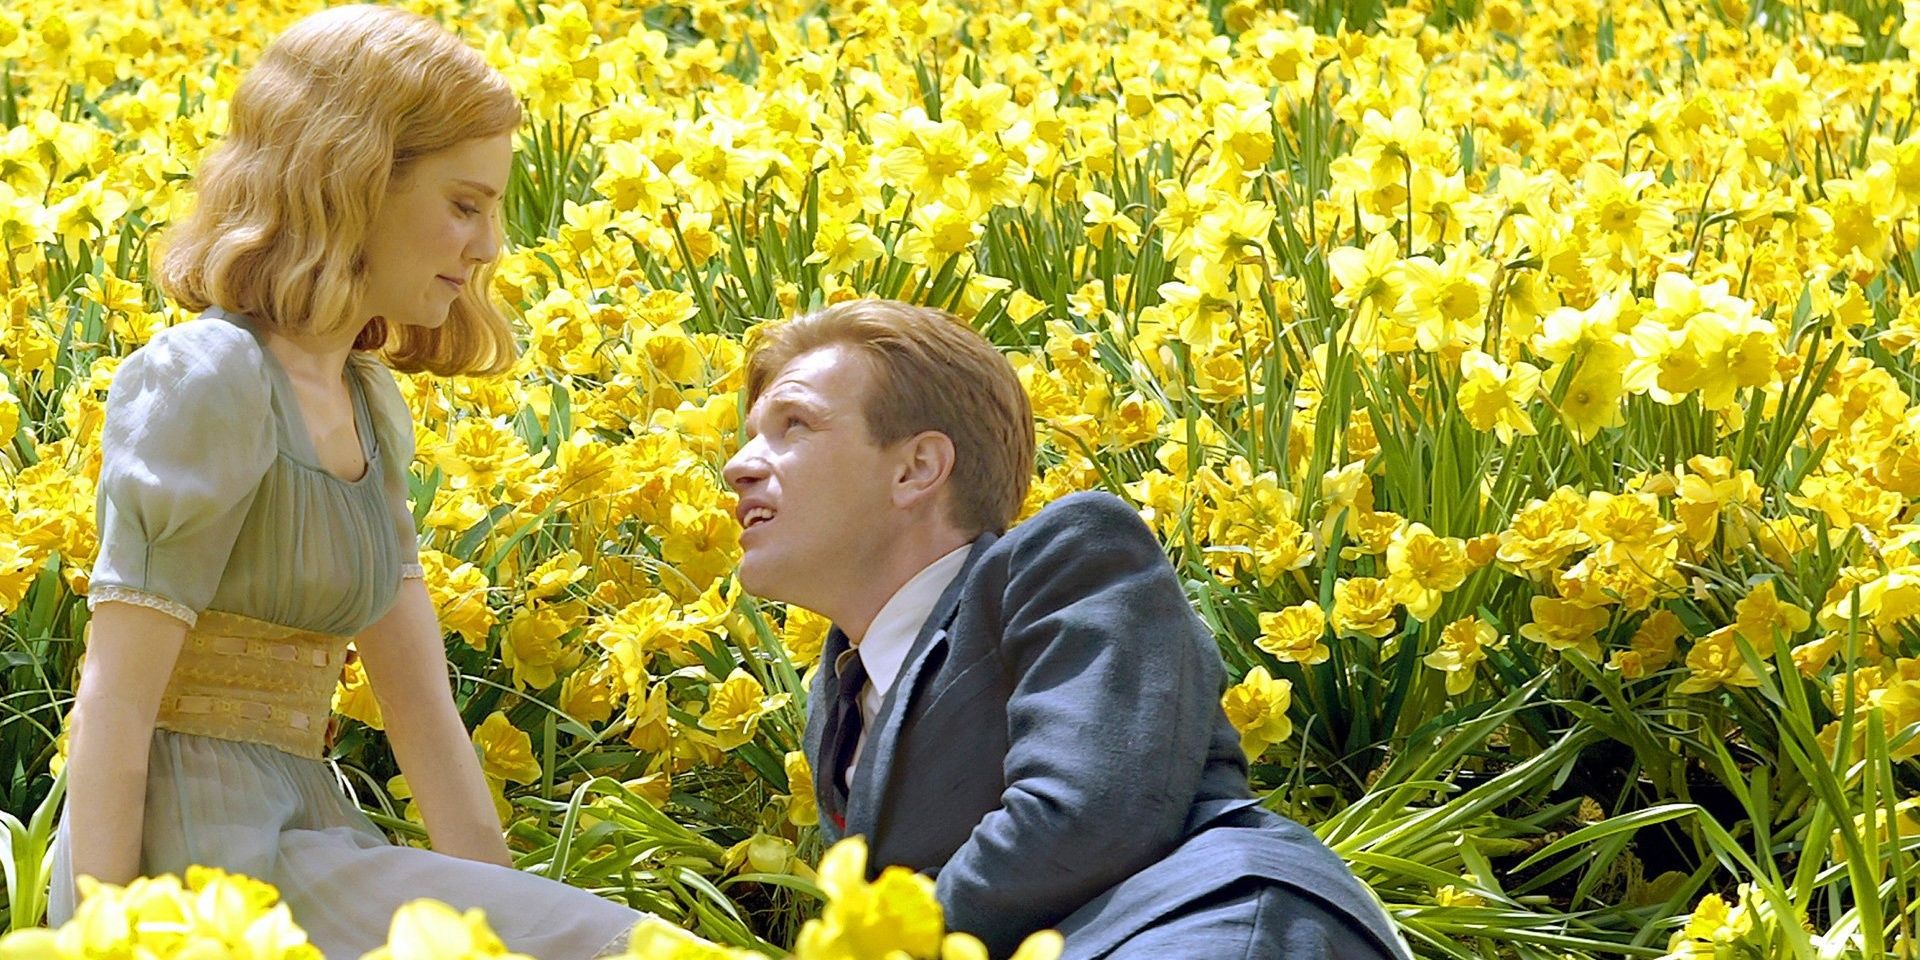 A man and a woman (Alison Lohman and Ewan McGregor) sitting in a field of yellow flowers in Big Fish